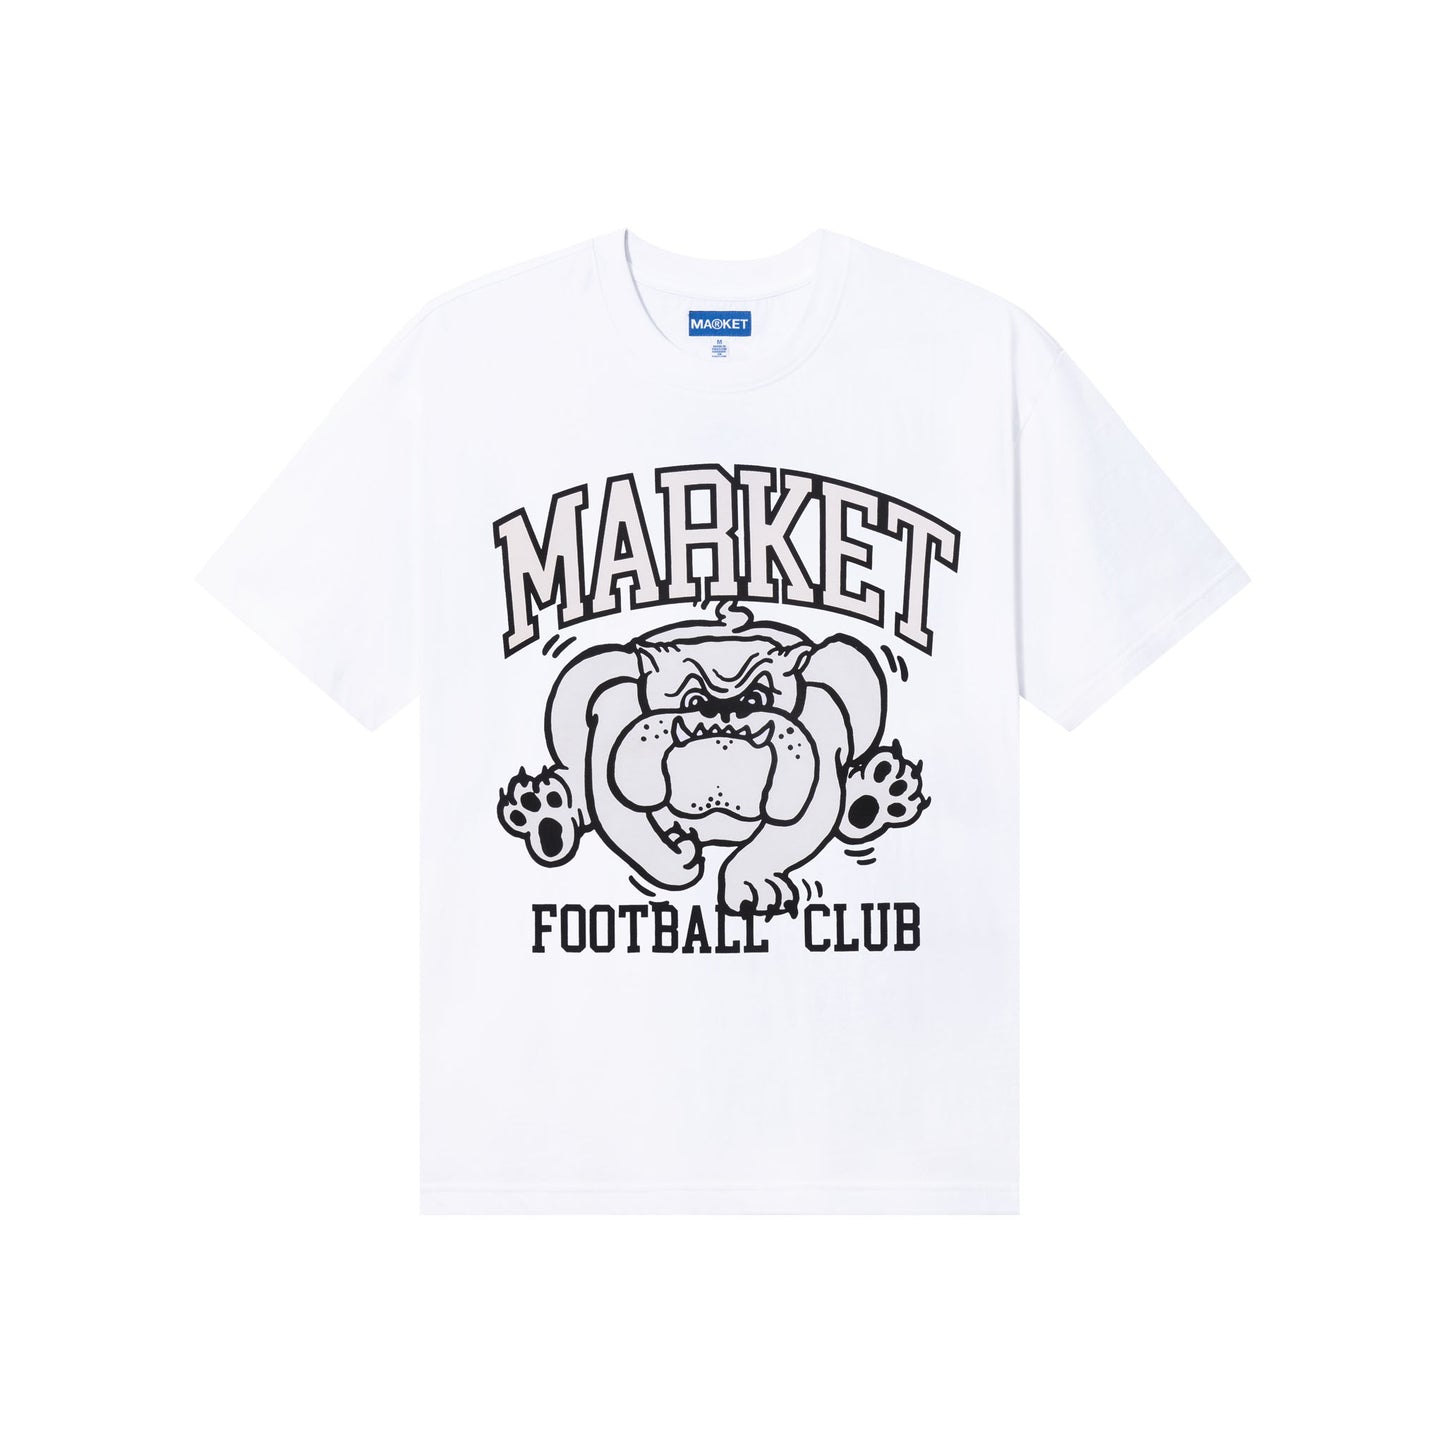 MARKET clothing brand OFFENSIVE LINE UV T-SHIRT. Find more graphic tees, hats, hoodies and more at MarketStudios.com. Formally Chinatown Market.